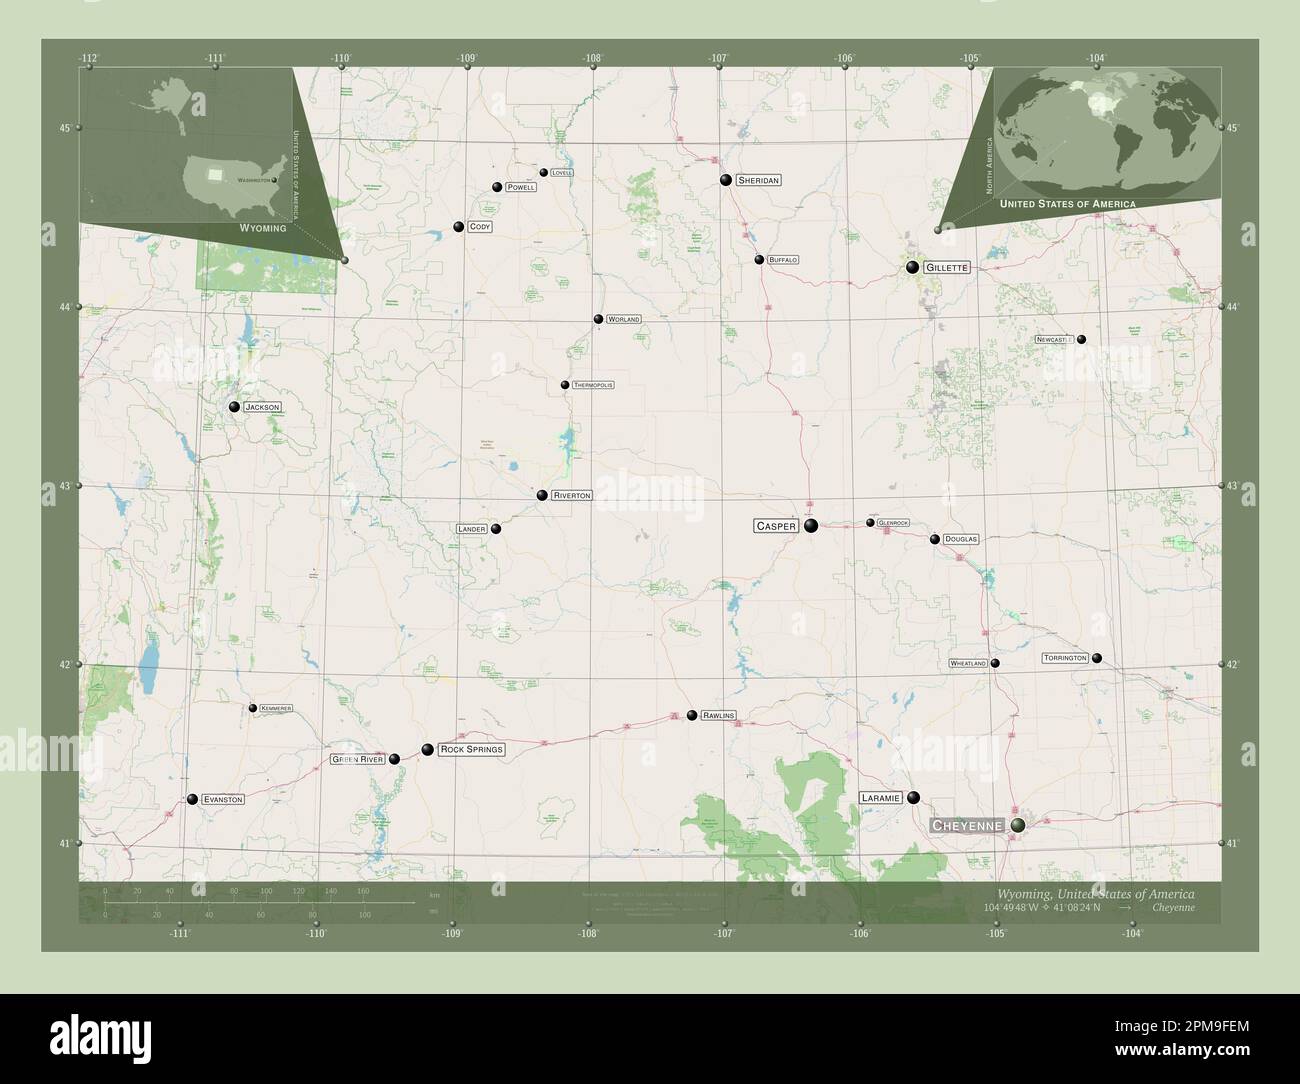 Wyoming, state of United States of America. Open Street Map. Locations and names of major cities of the region. Corner auxiliary location maps Stock Photo